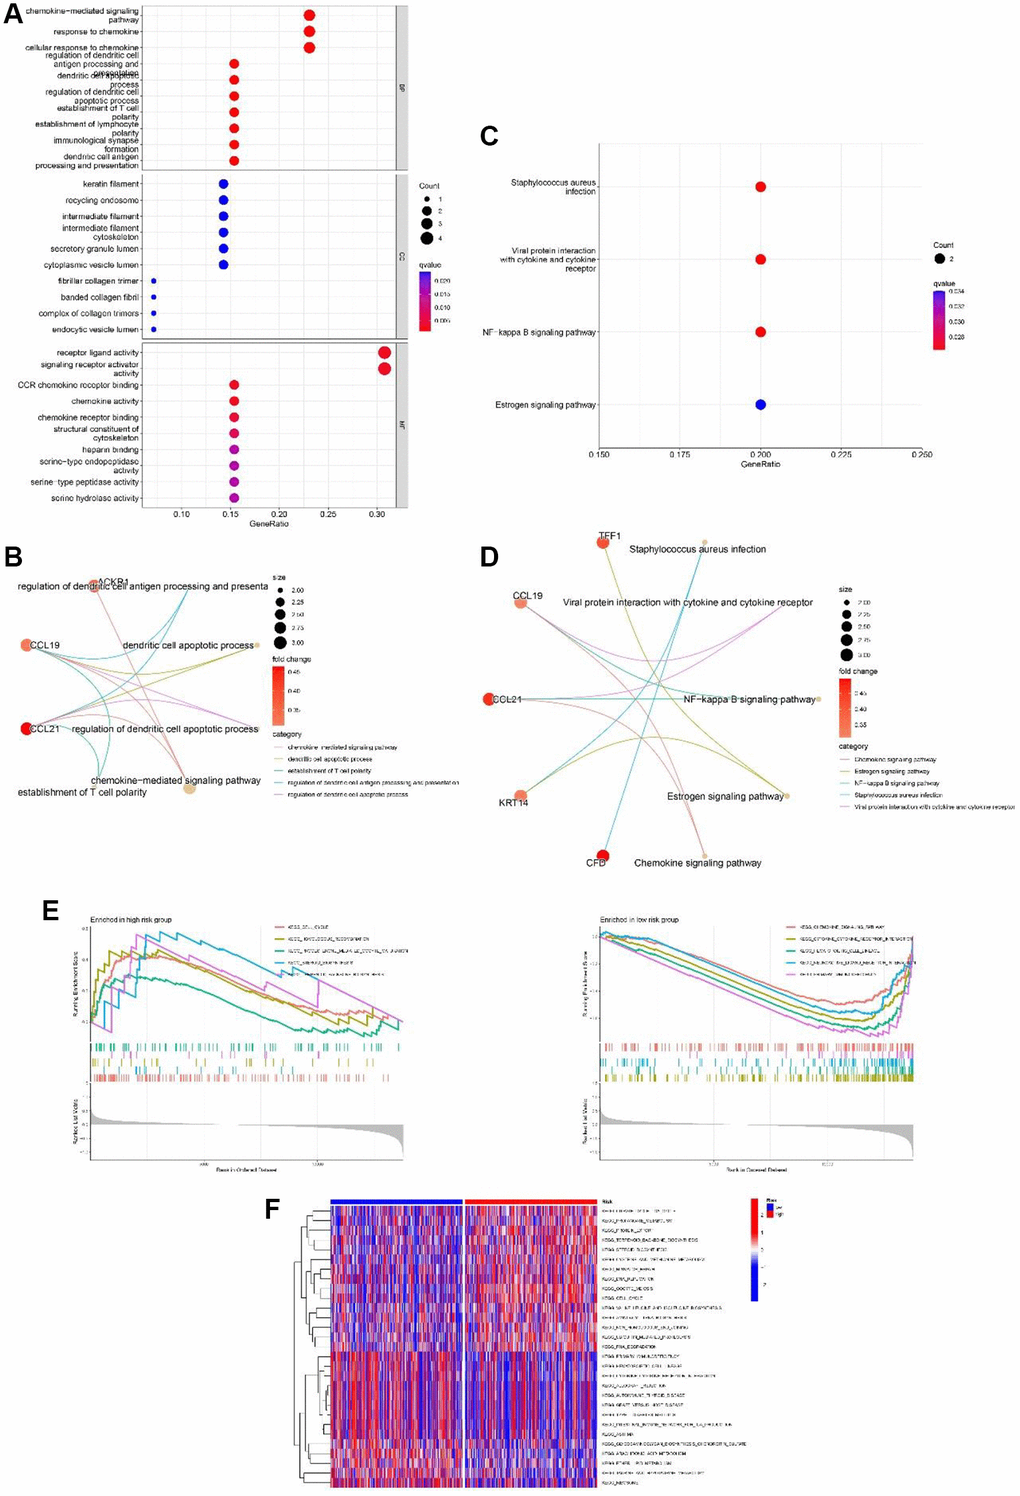 Functional analyses of the 13-gene signature in the TCGA cohort. (A, B) GO enrichment analysis of differentially expressed genes (DEGs) between the high and low-risk group. (C, D) KEGG enrichment analysis of DEGs between the high-risk group and low-risk group. (E) GSEA of high-risk group and low-risk group. (F) Gene set variation analysis (GSVA) of high-risk group and low-risk group.